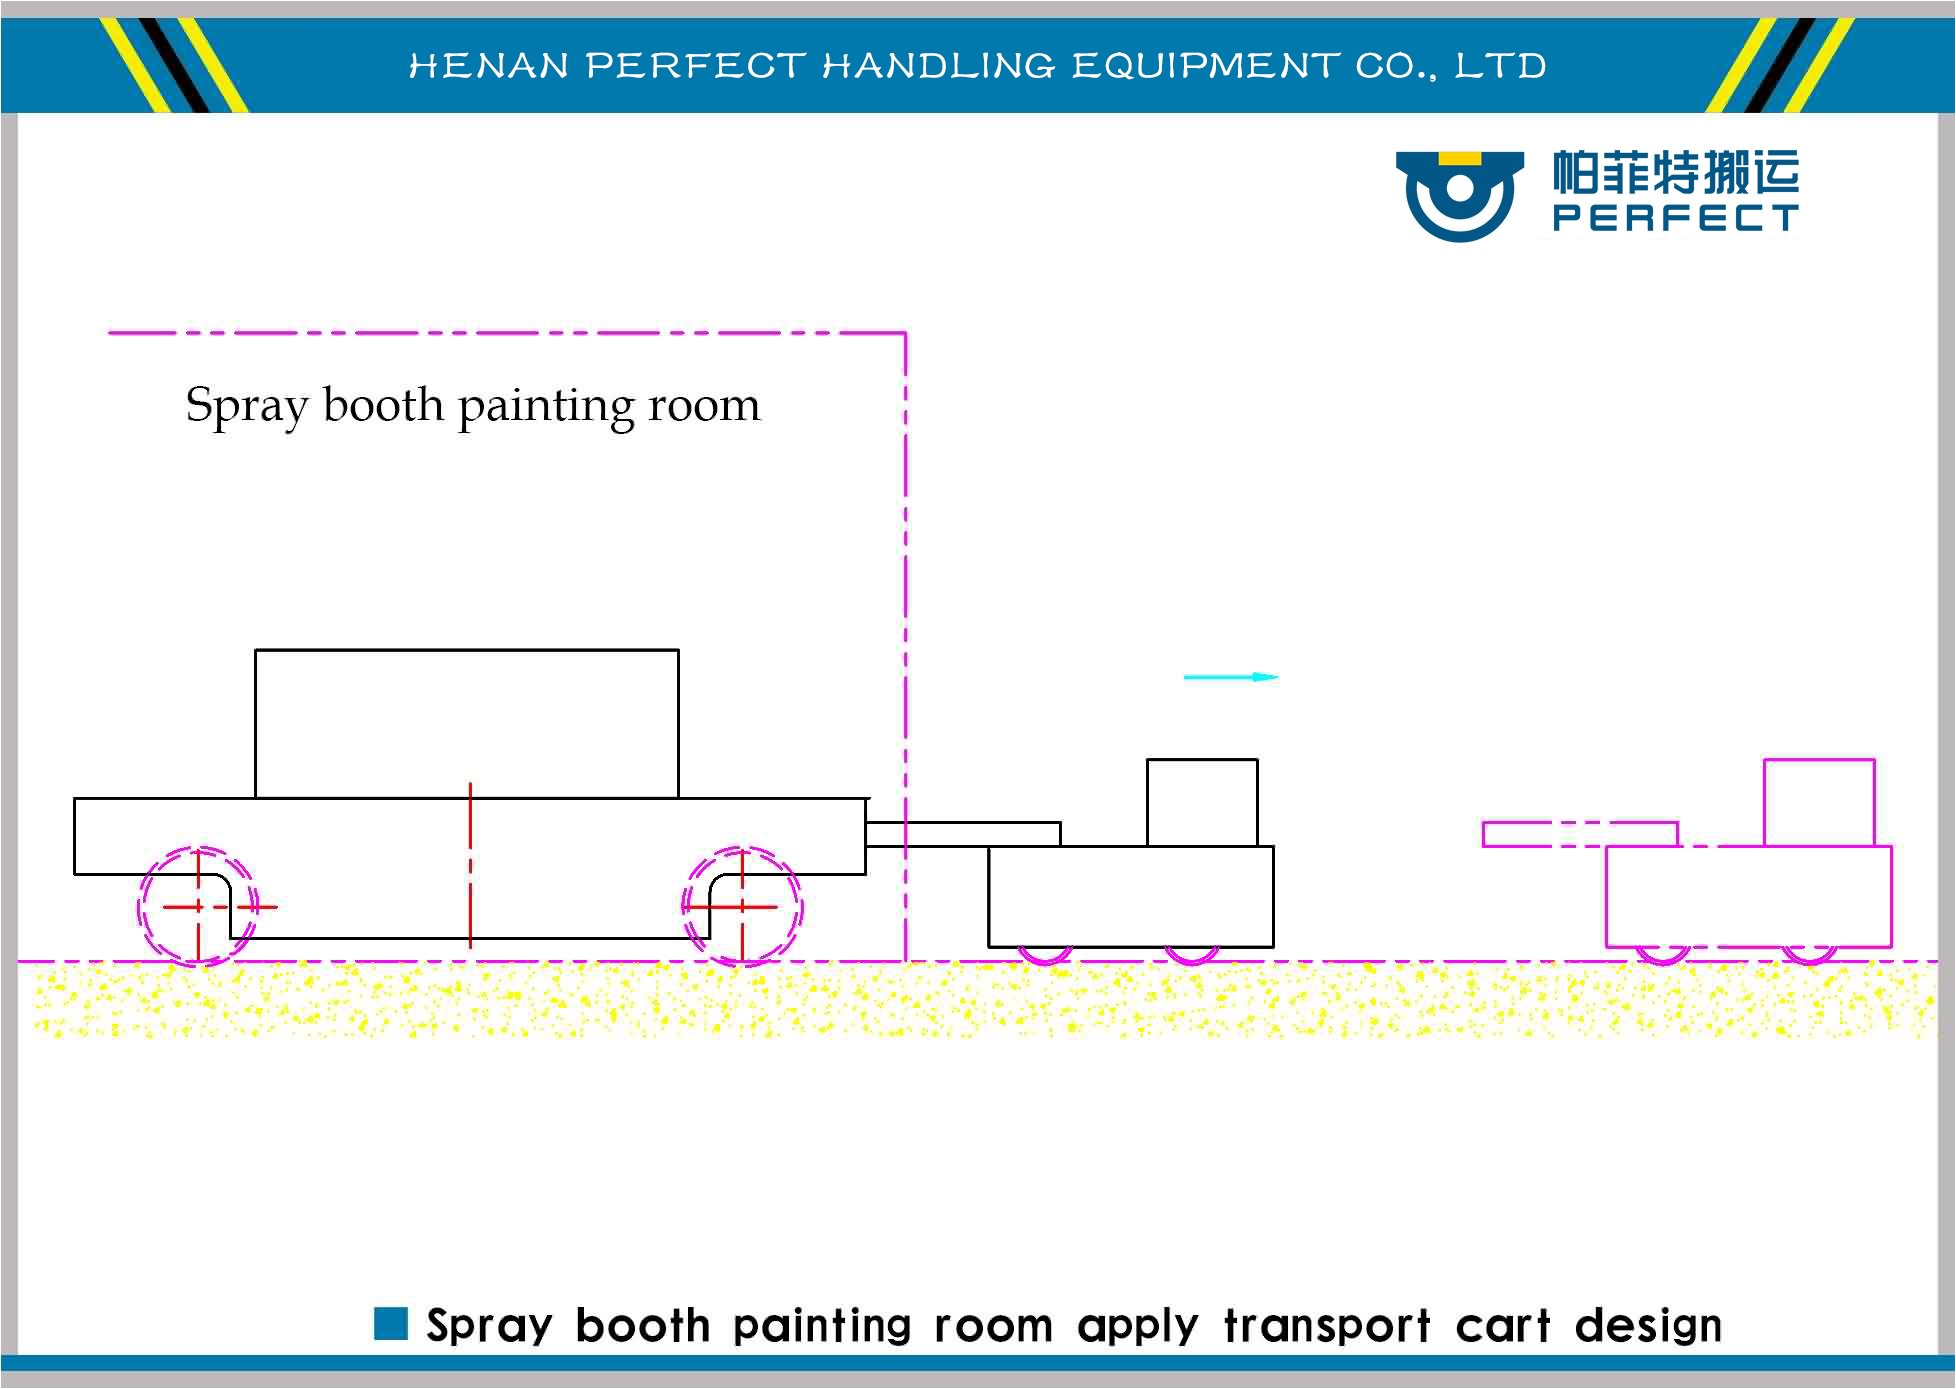 painting room apply cart,machines transport cart